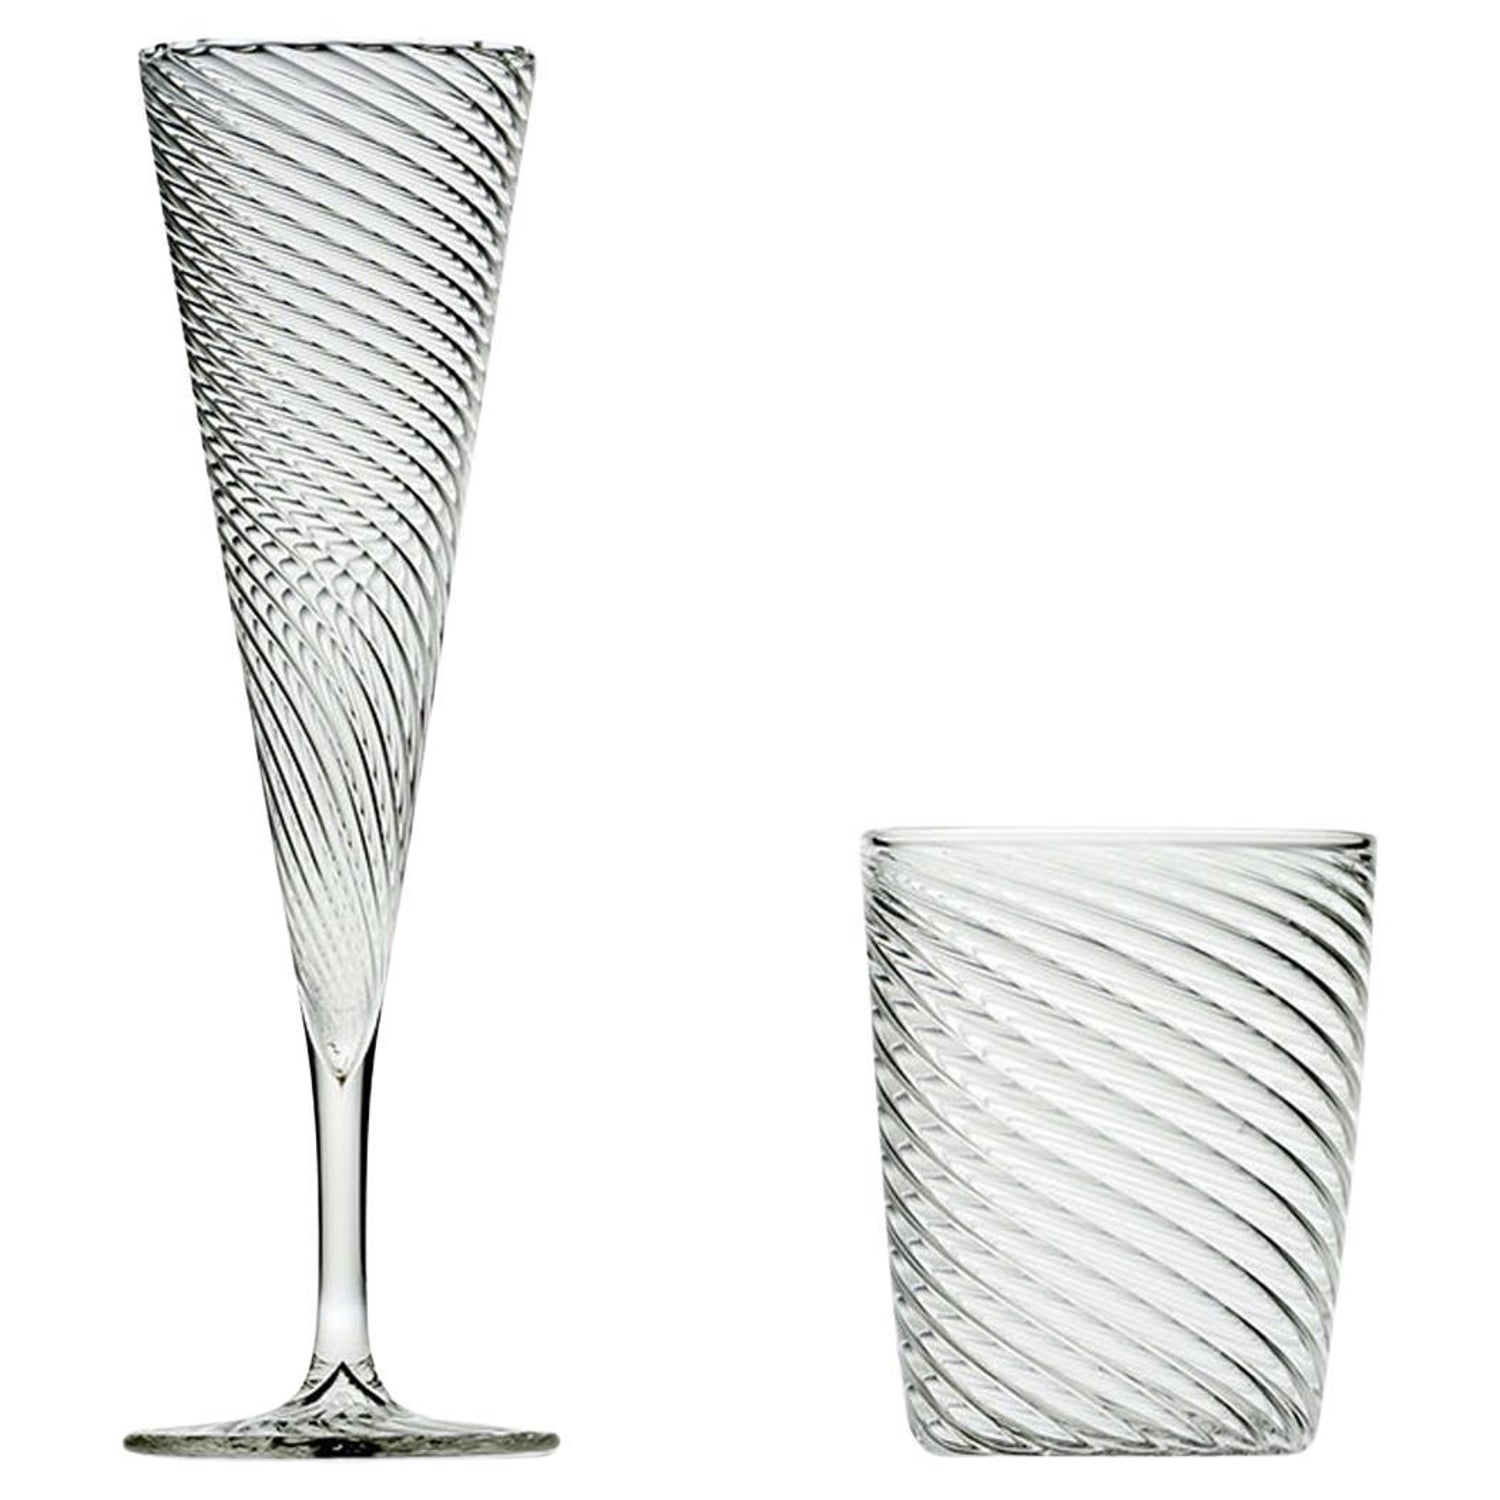 https://a.1stdibscdn.com/set-of-mille-righe-flutes-and-water-glasses-for-six-for-sale/f_17062/f_366588521697552103955/f_36658852_1697552104365_bg_processed.jpg?width=1500